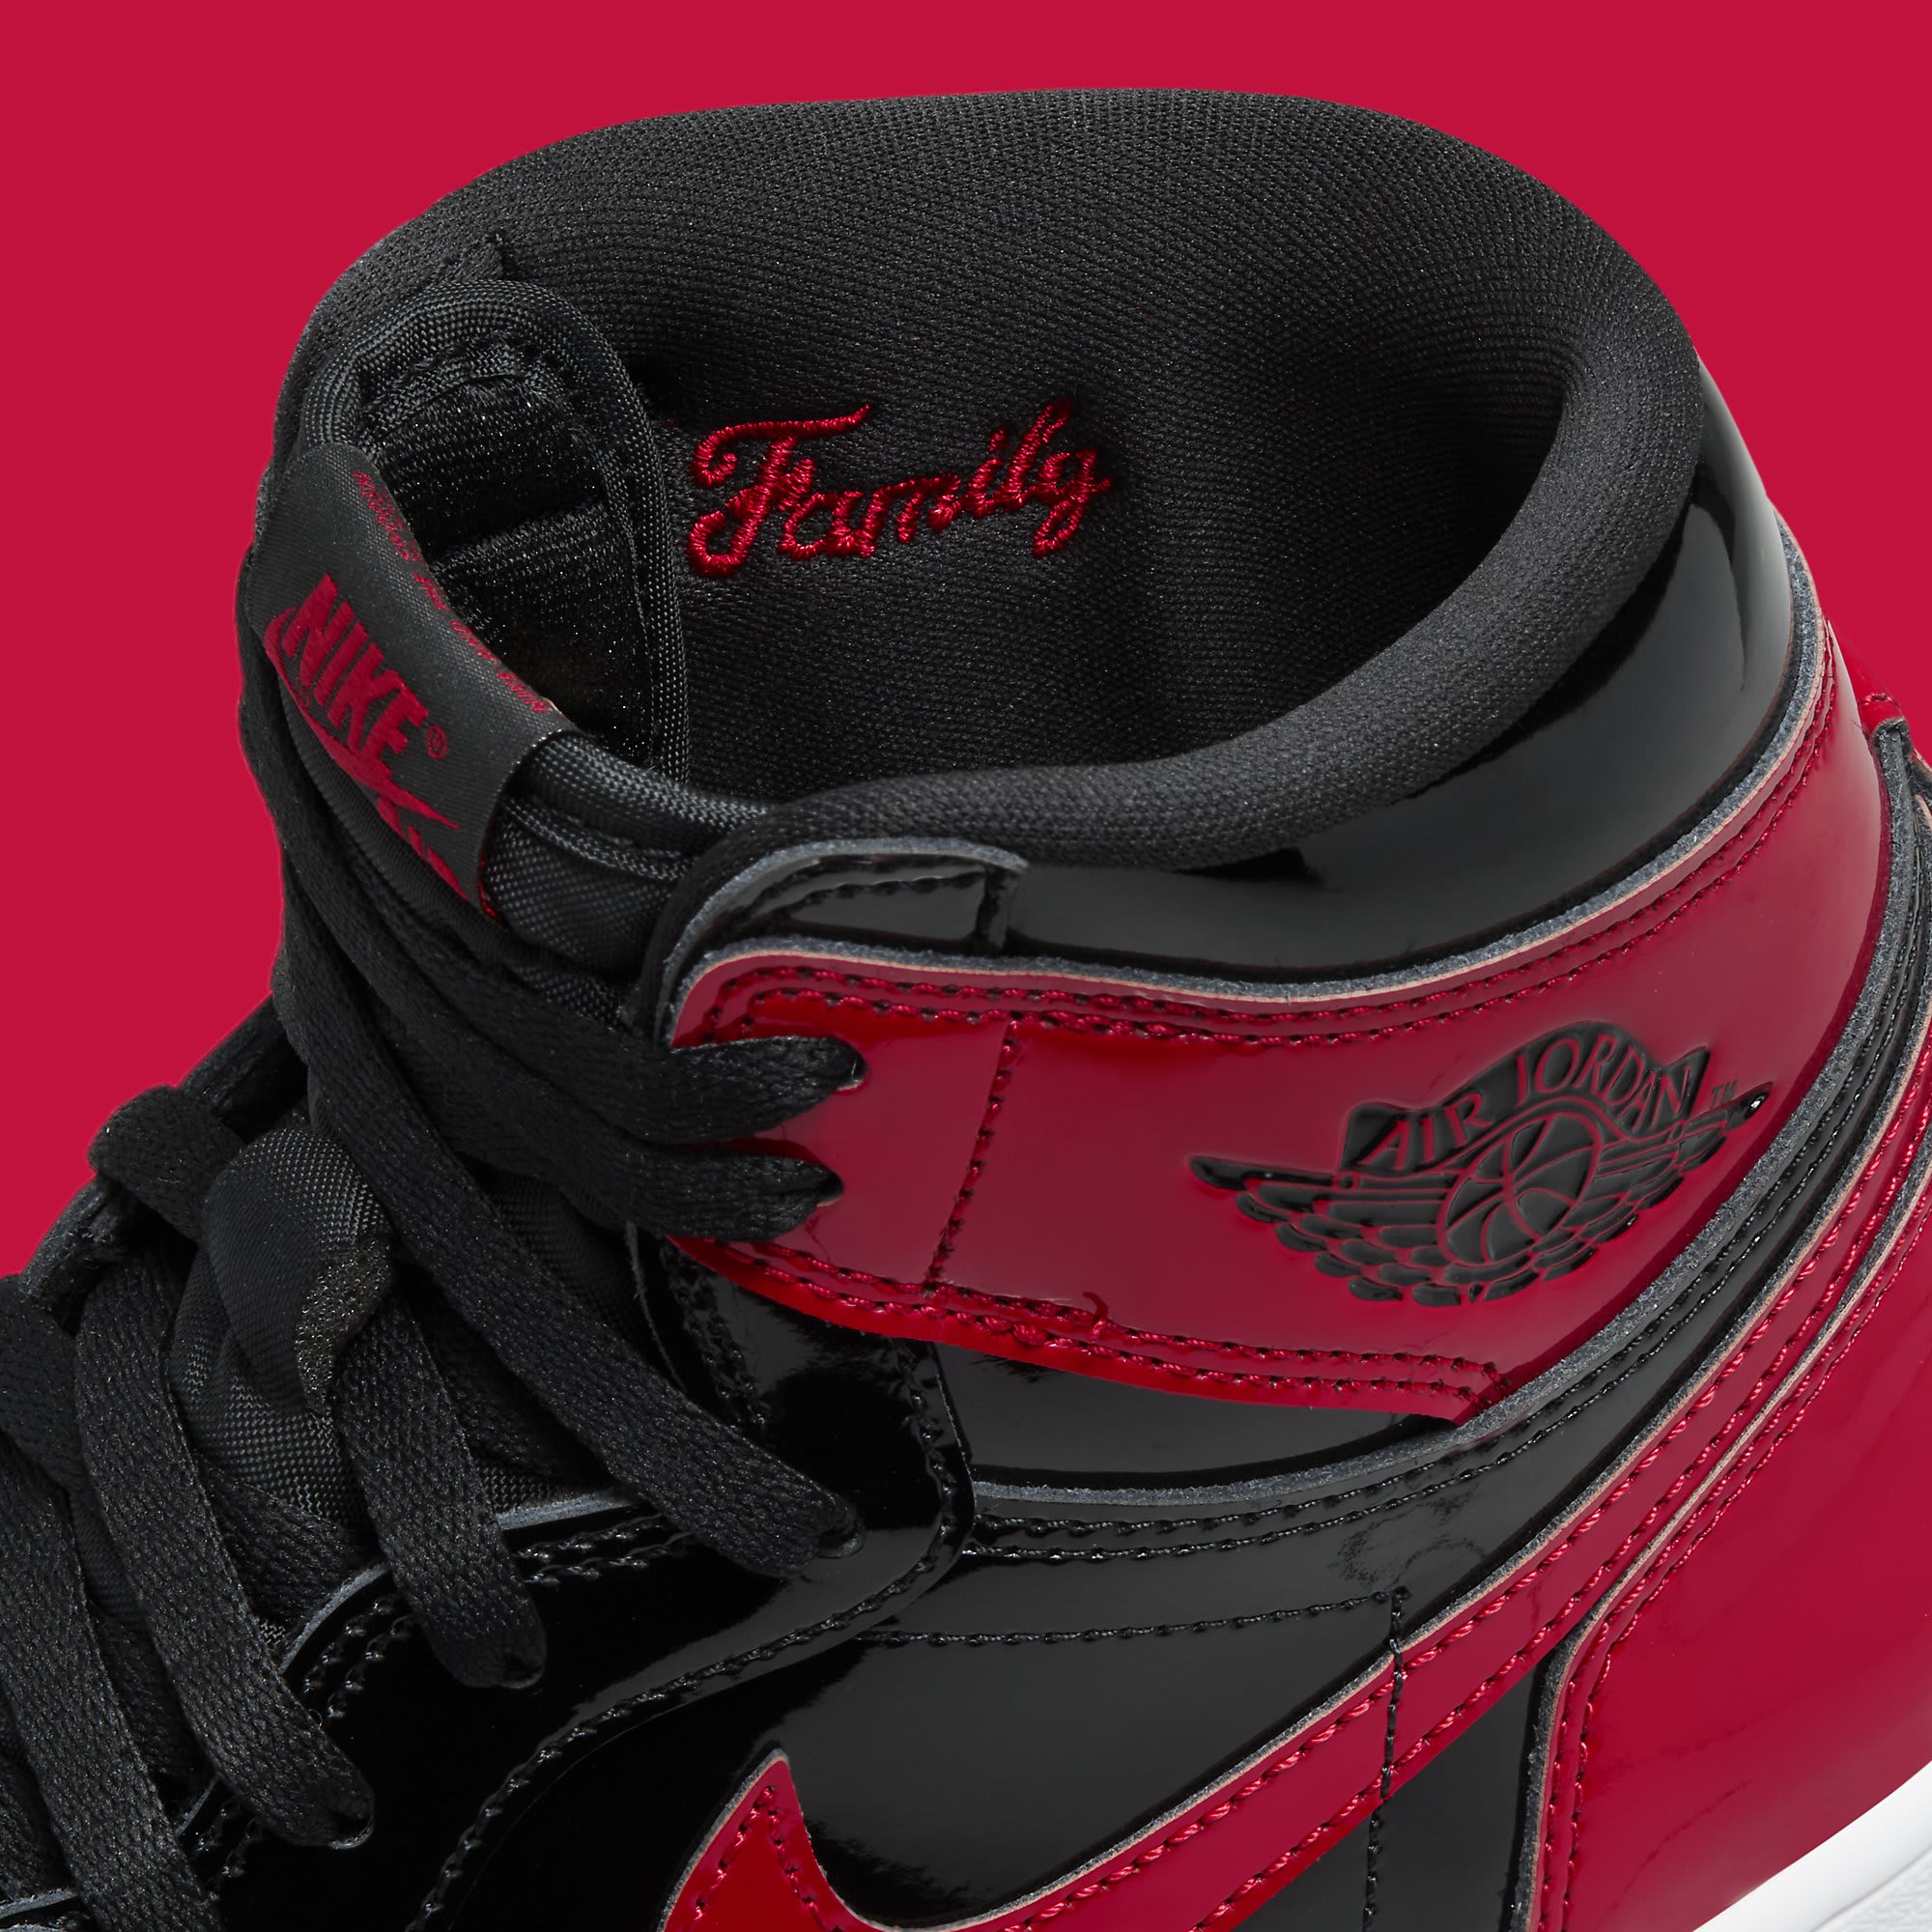 Air Jordan 1 I Bred Patent Leather Release Date 555088-063 Lining